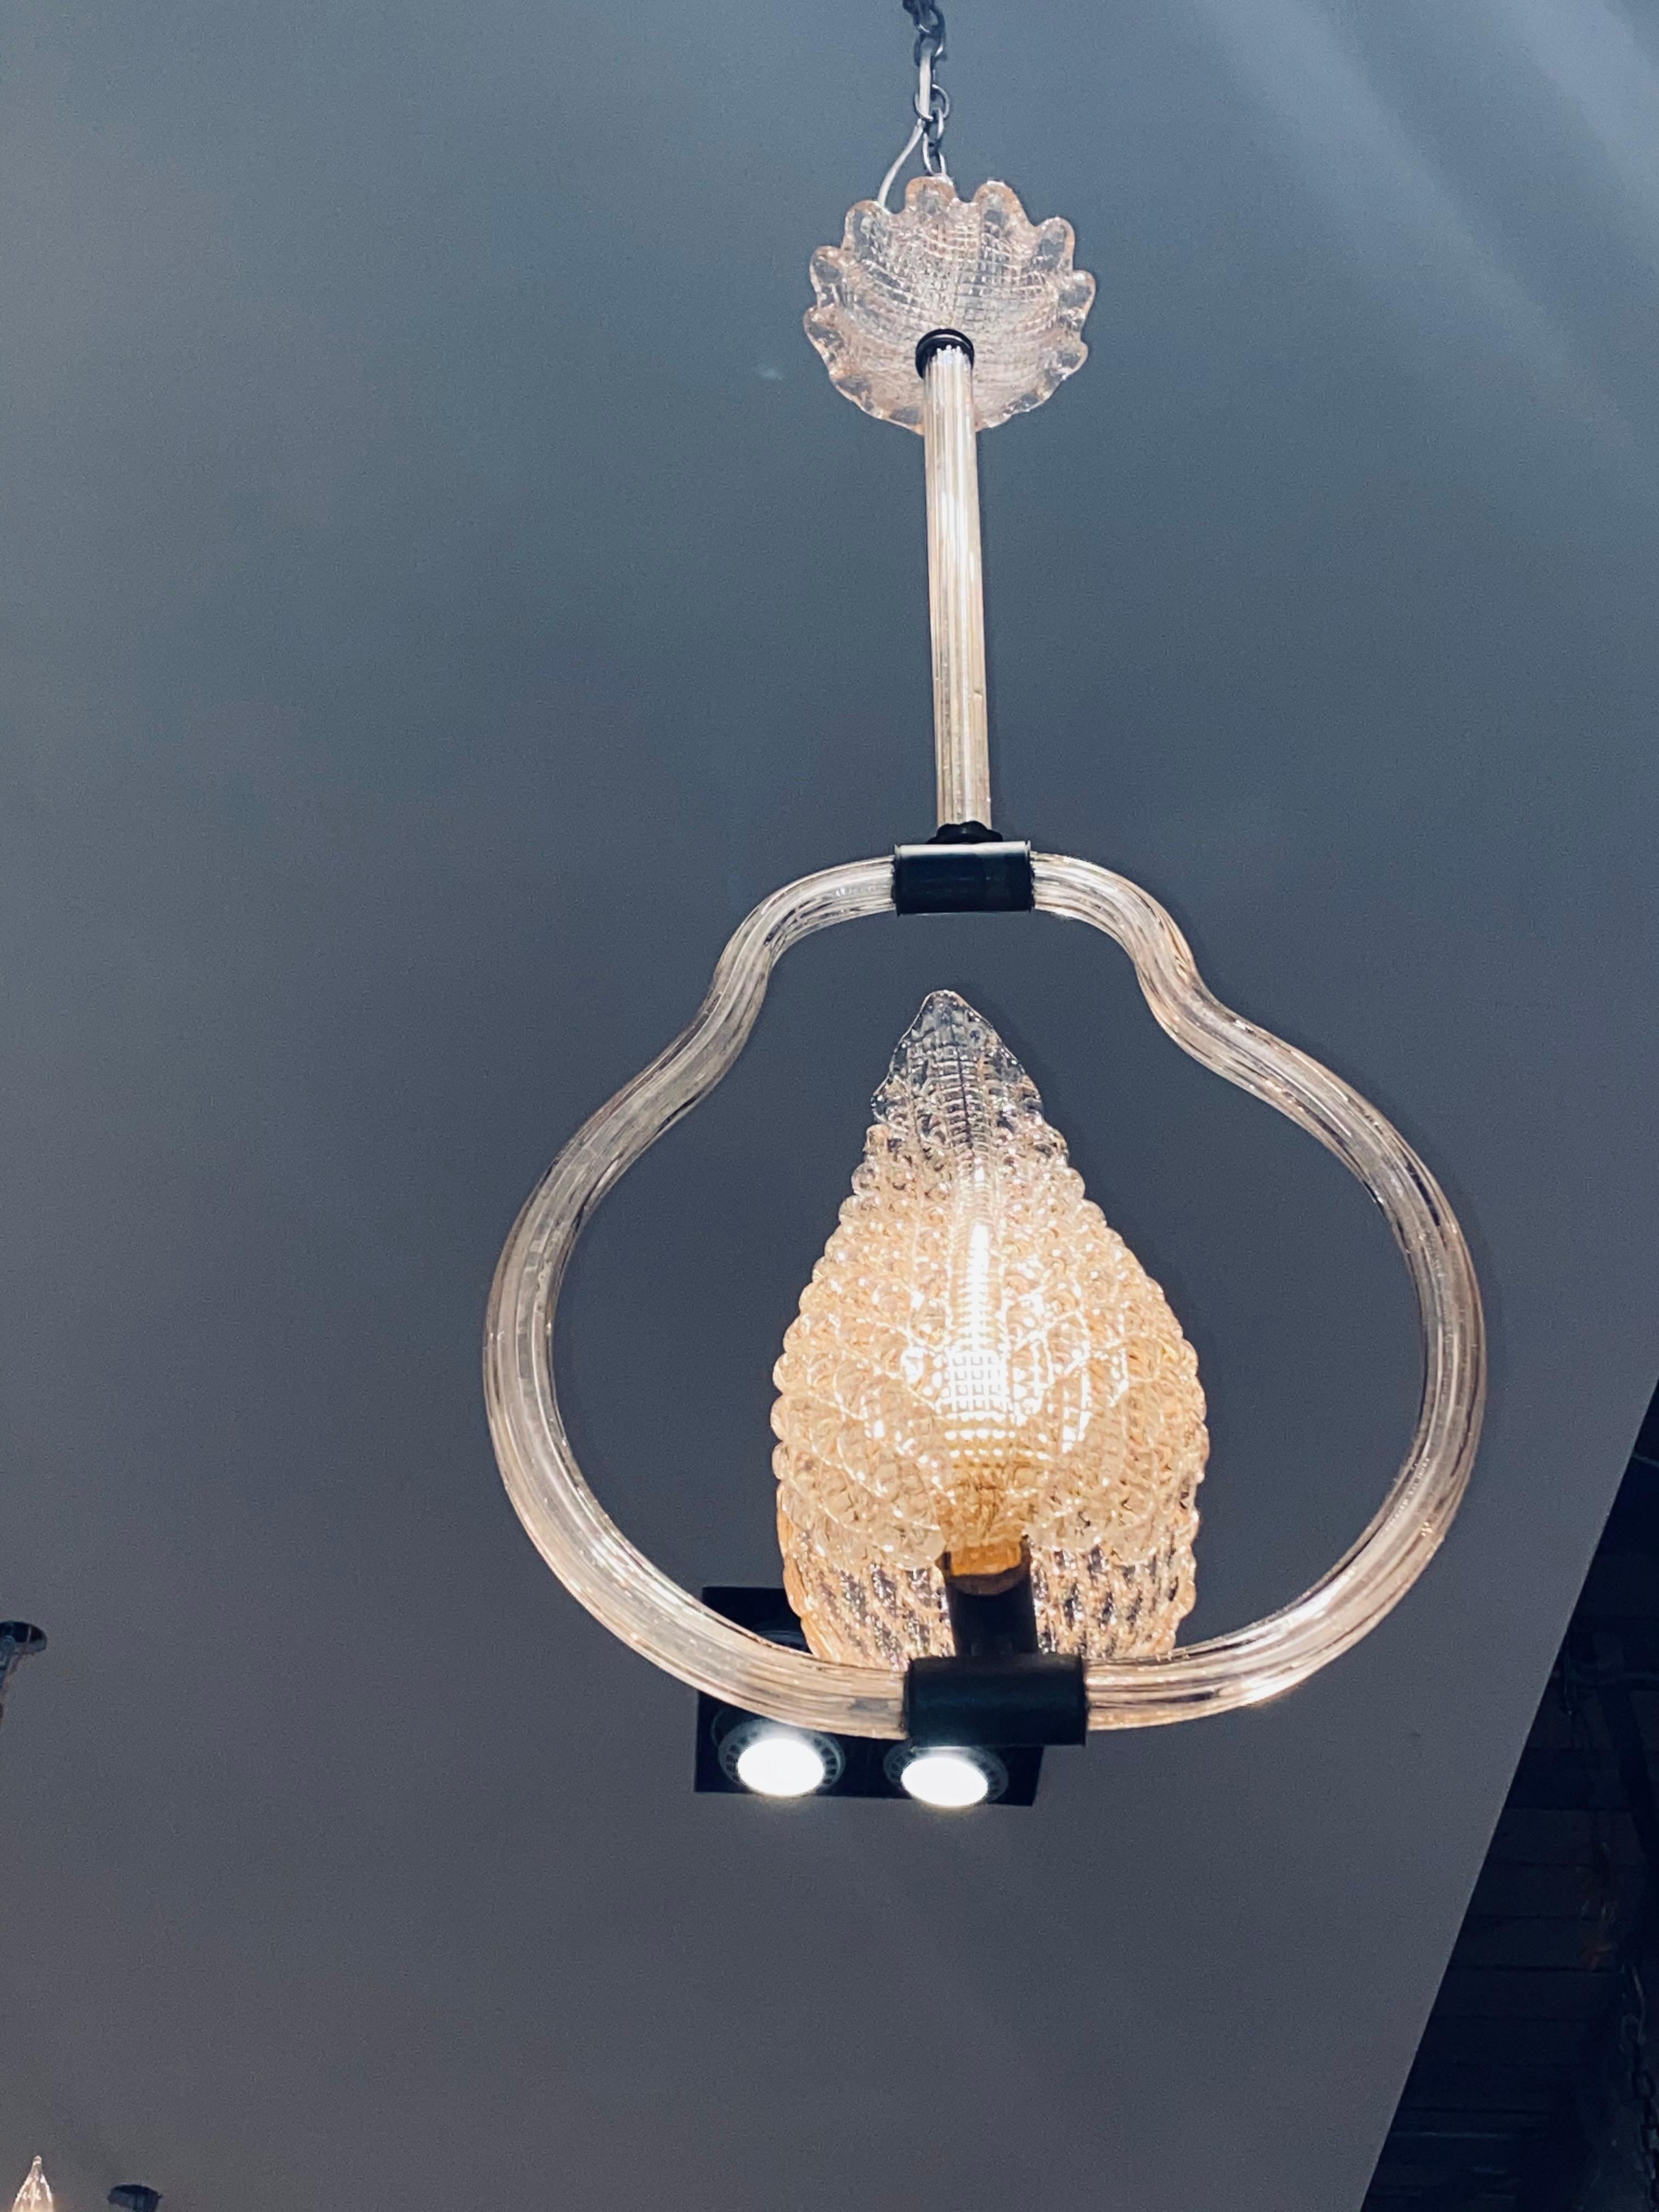 Italian Murano art glass chandelier, in the style of Barovier & Toso, c.1940s-1950s, blush pink glass, scalloped ceiling cap with impressed lattice pattern, fluted glass-clad standard and lobed ring, two foliate-form shades, concealing a single